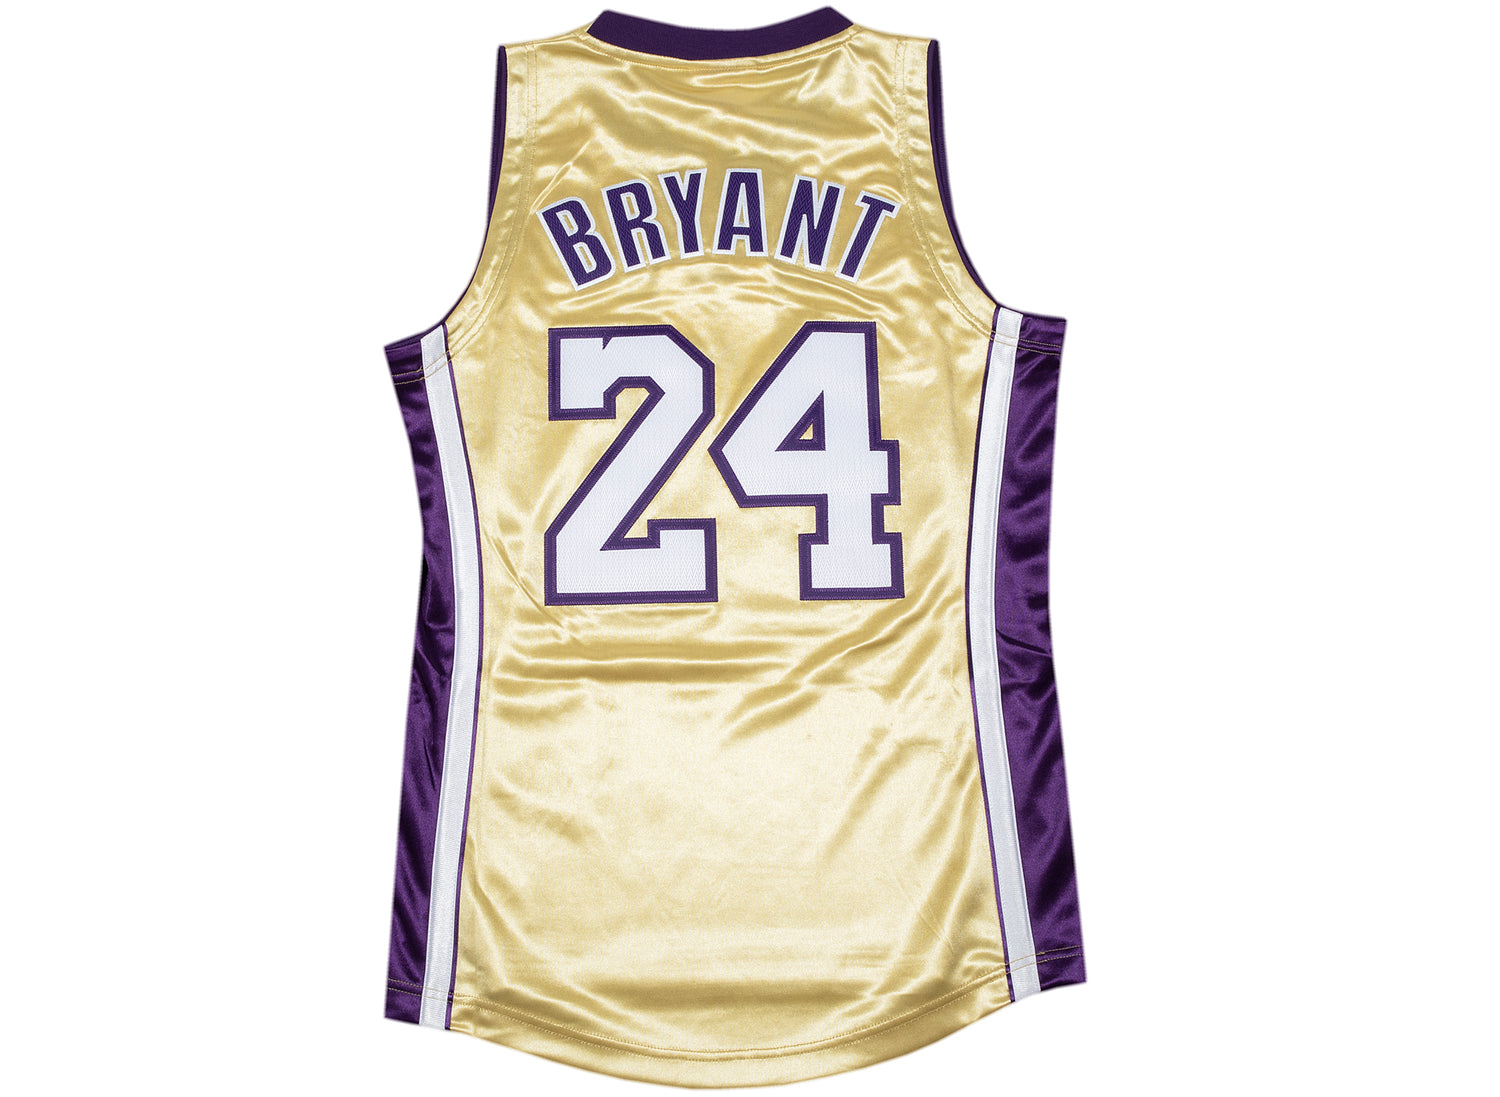 MITCHELL AND NESS Los Angeles Lakers Kobe Bryant 8/24 Authentic